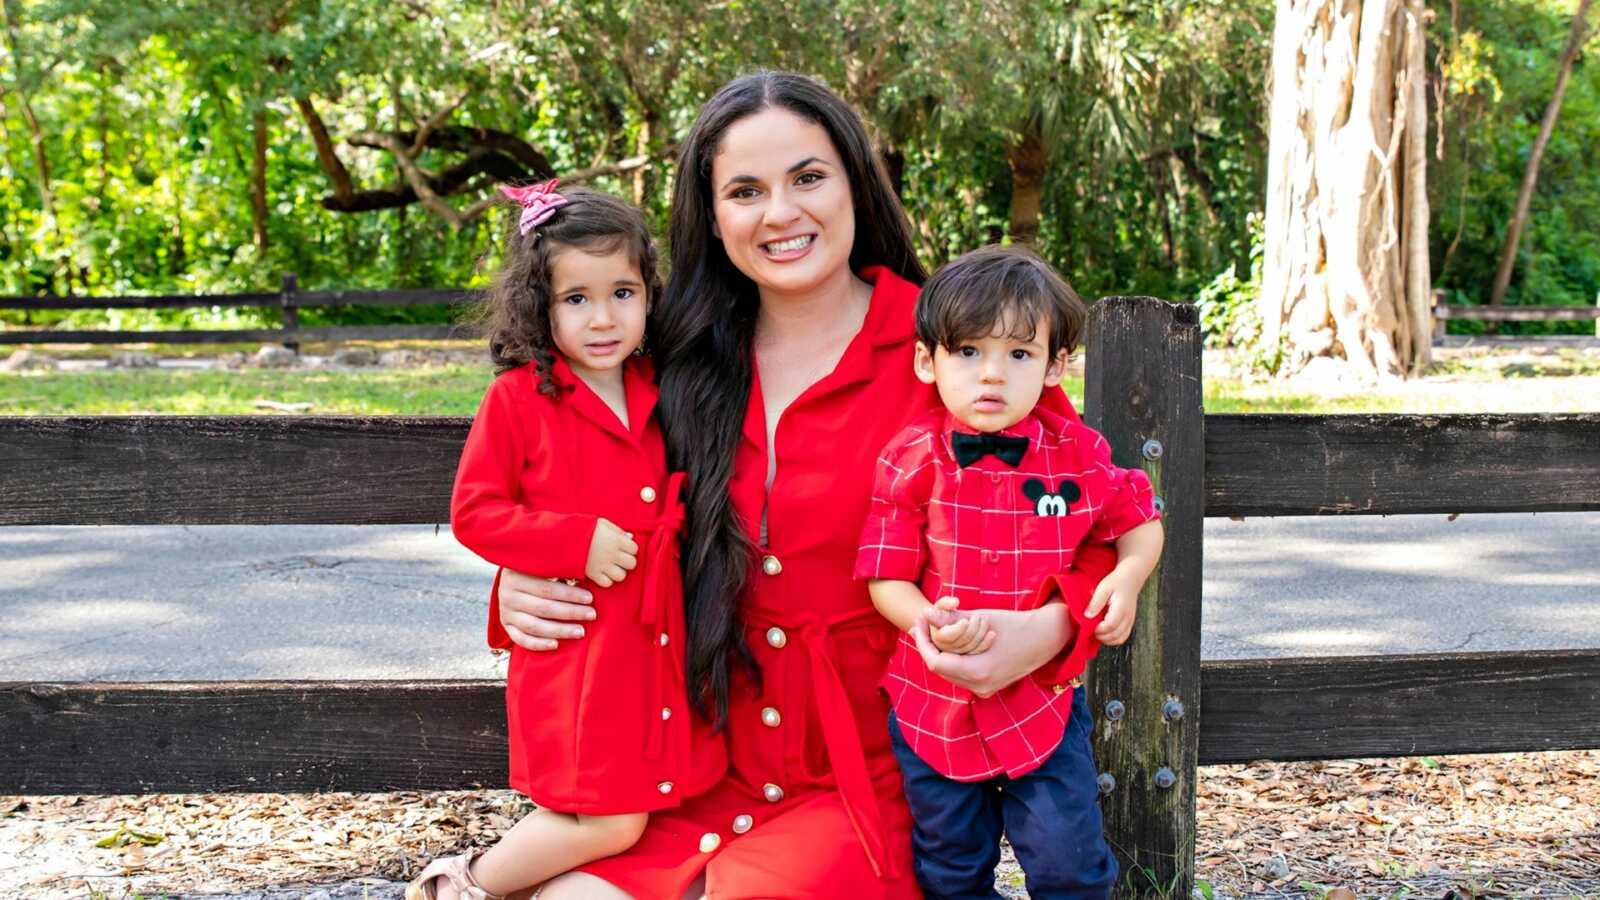 co-parenting mom poses with two children in red outfits